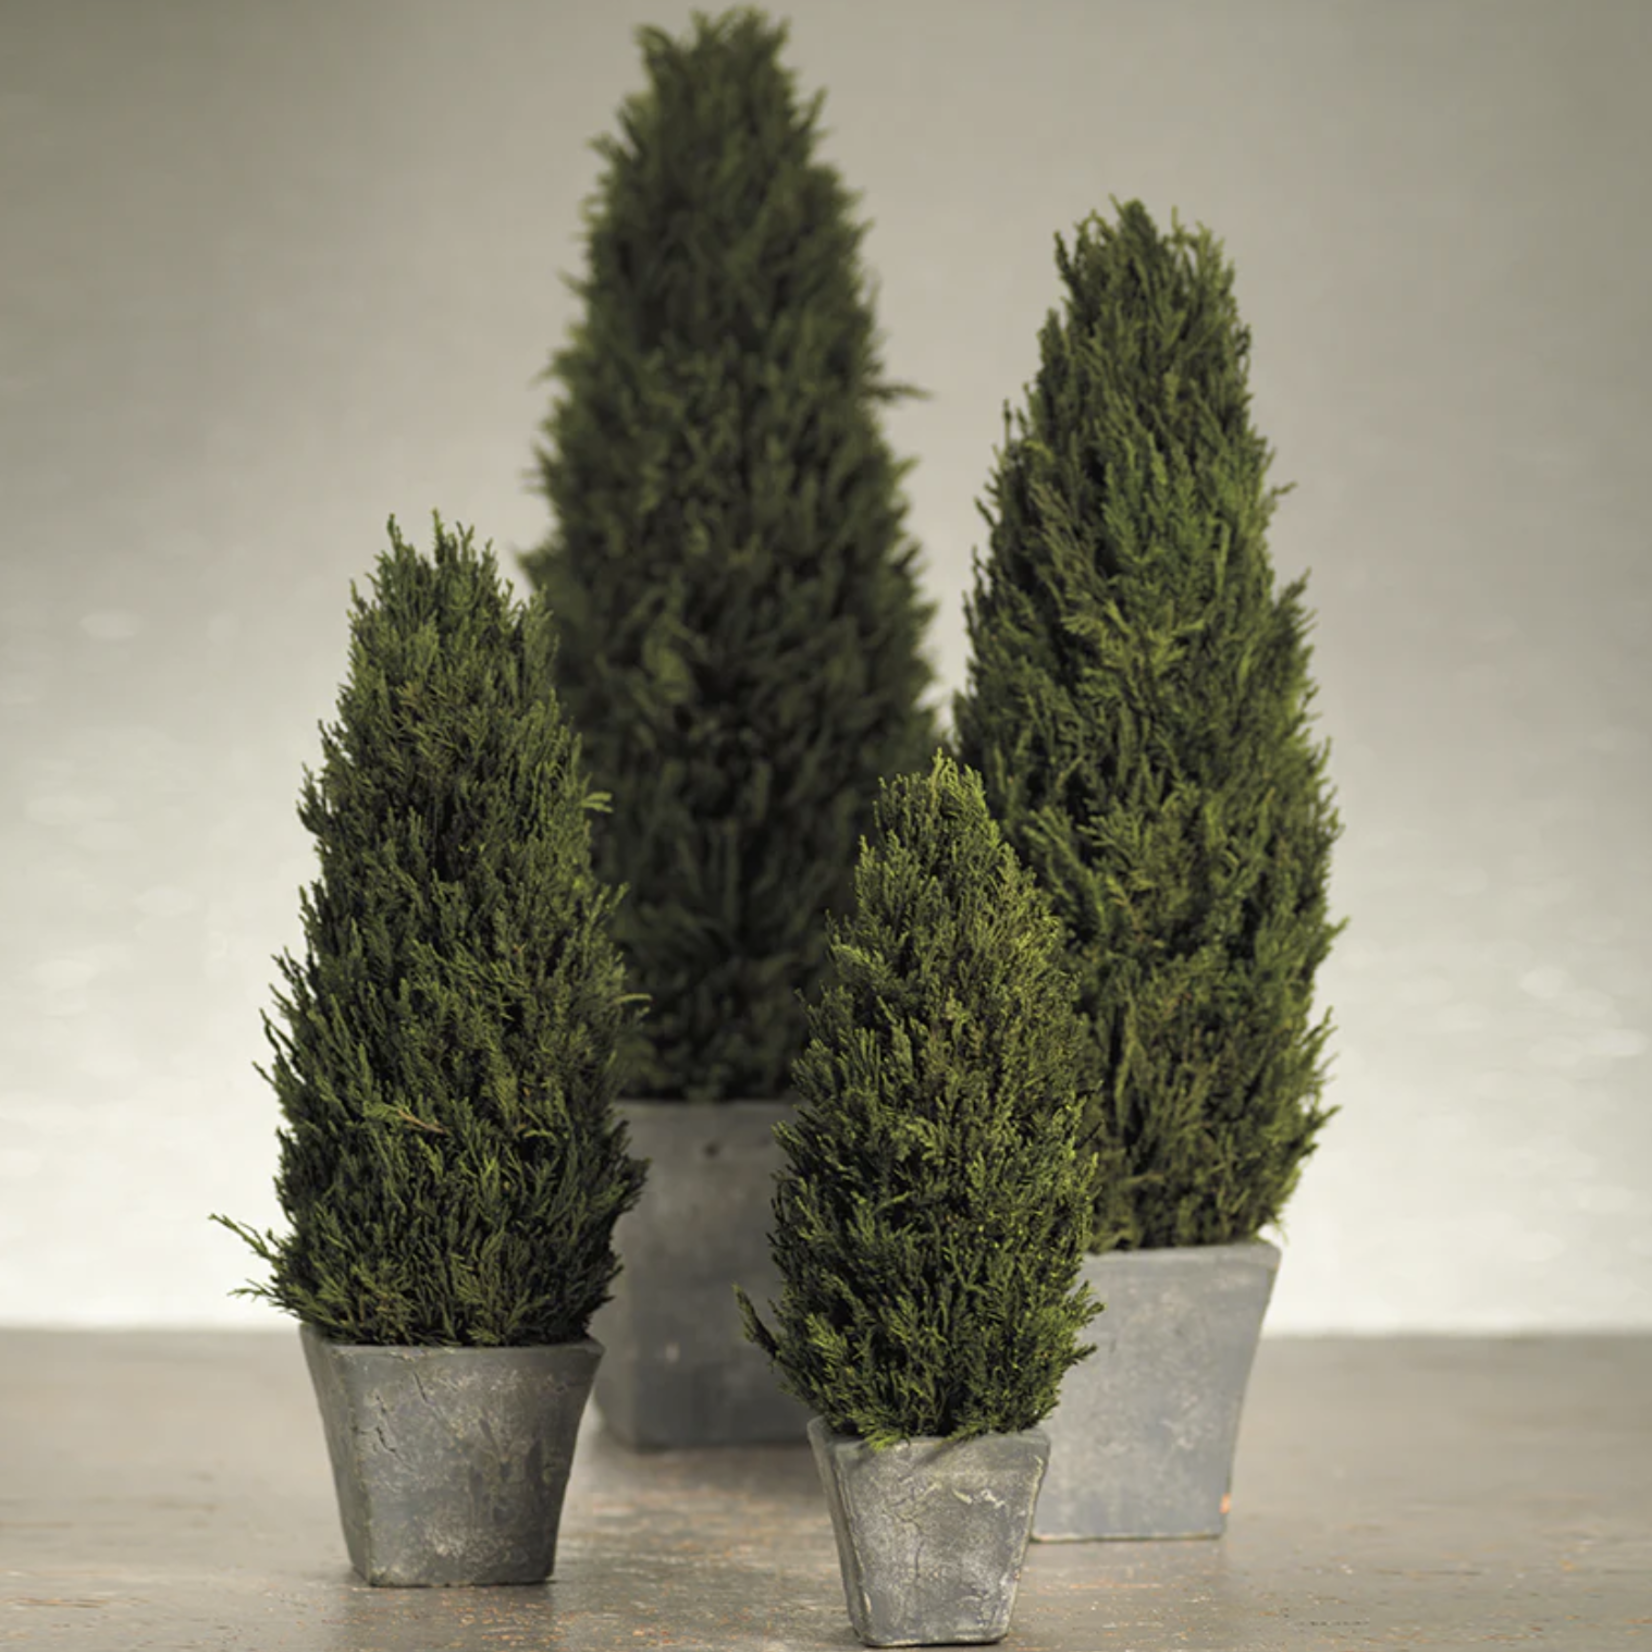 Zodax Cypress Tree Topiary Extra Large